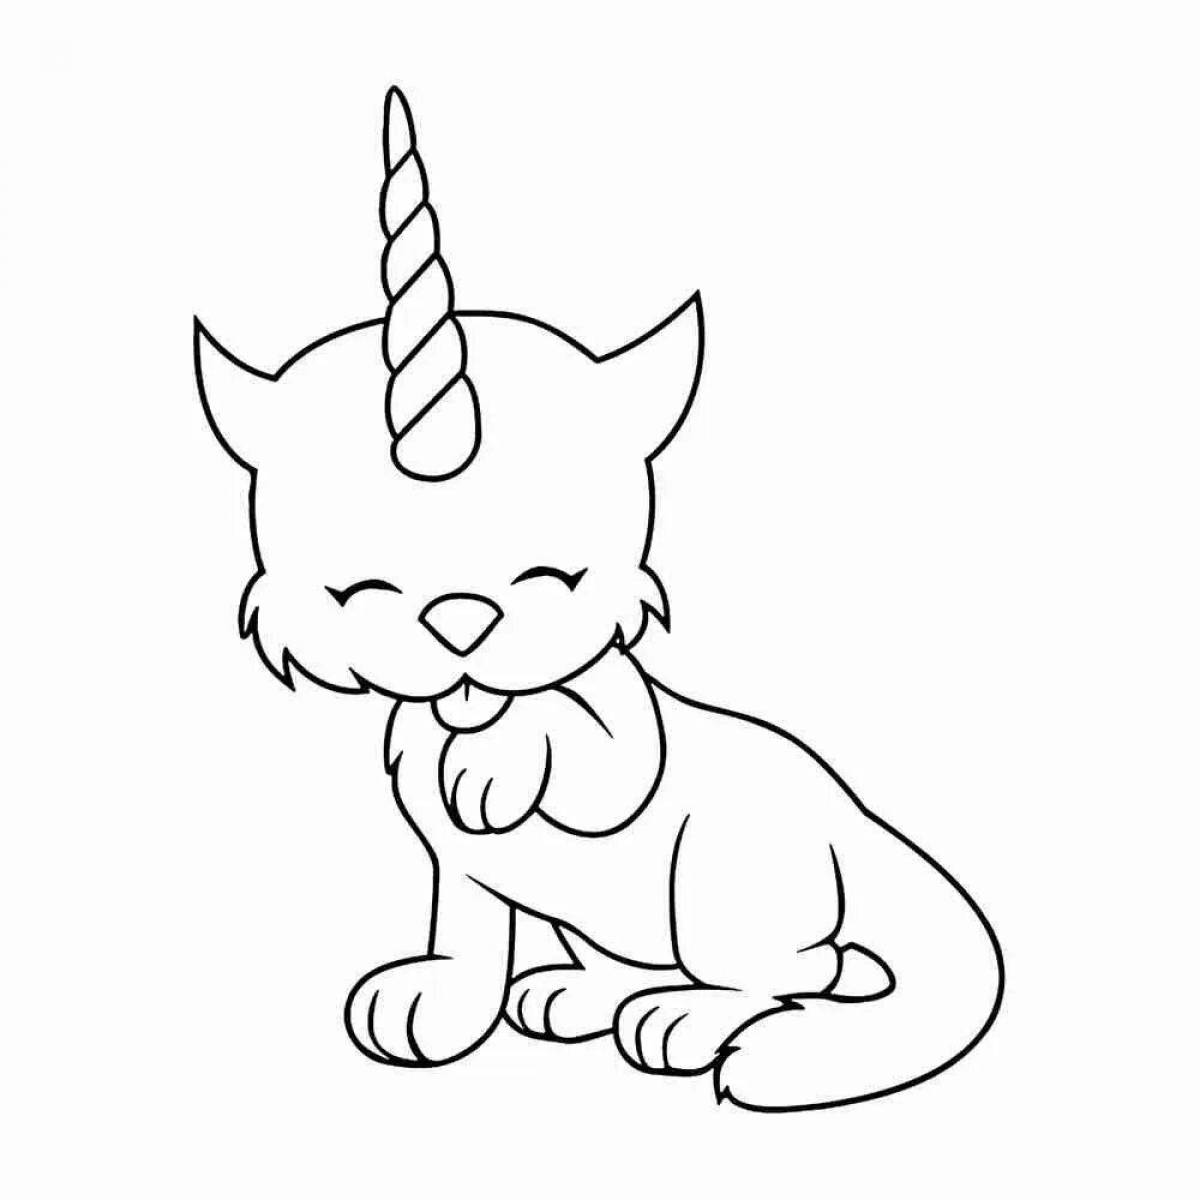 Naughty rainbow kitten coloring page